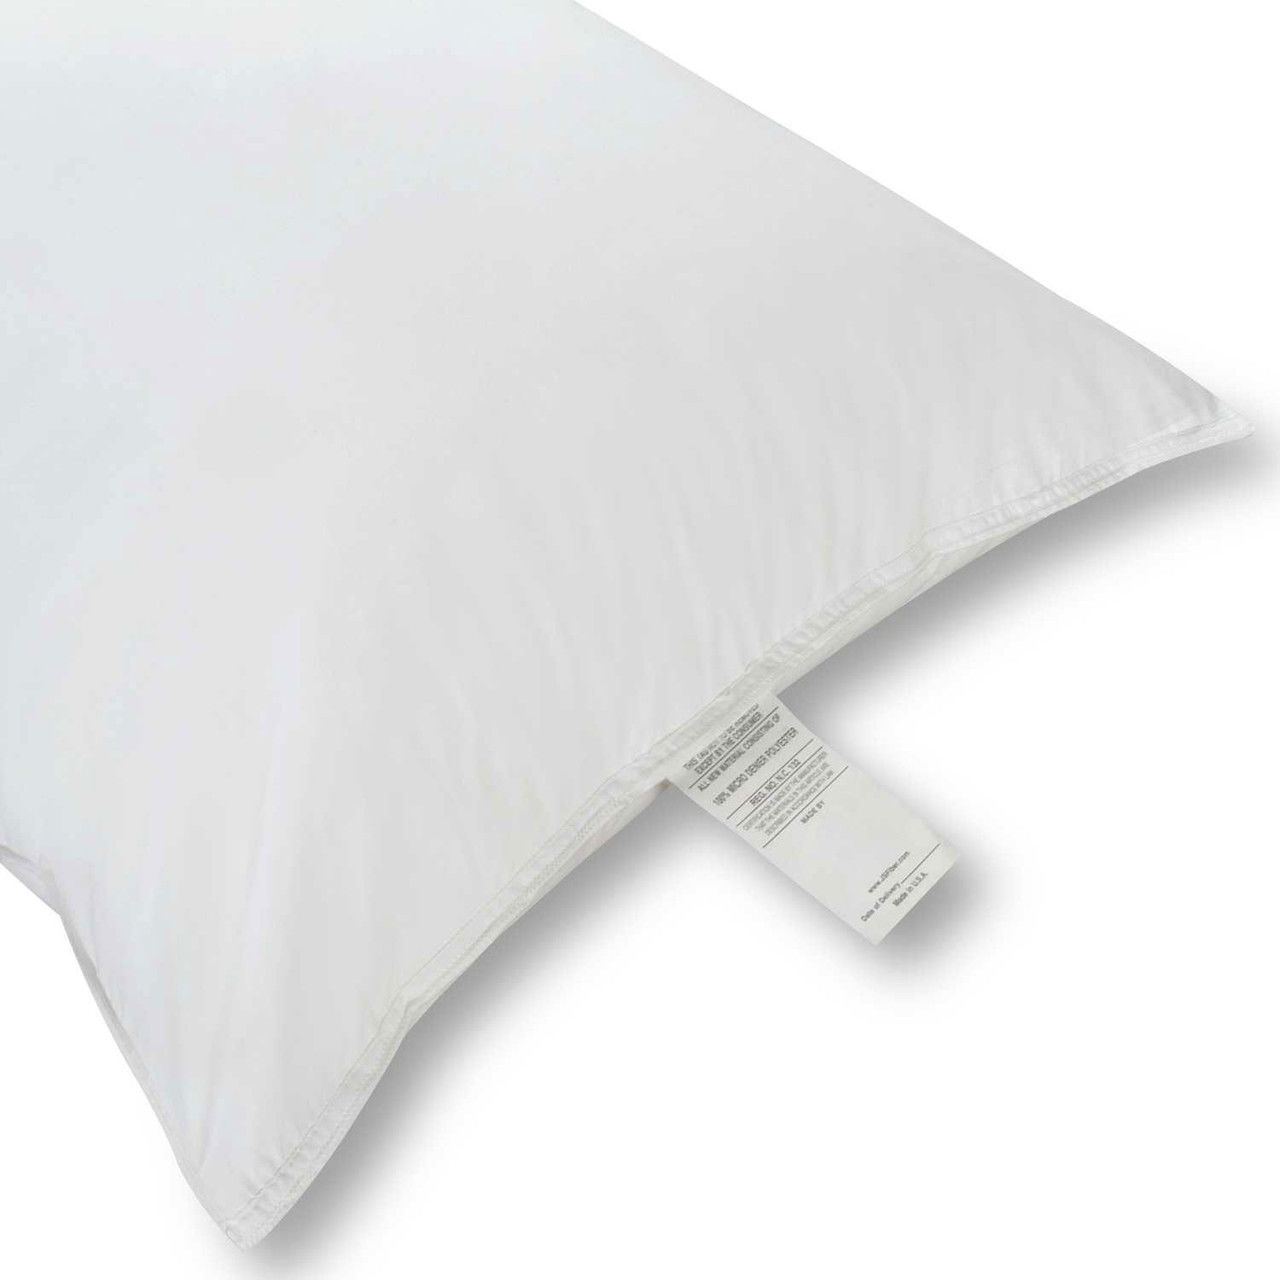 Can you list some extra features of the Ultra Down Pillow?